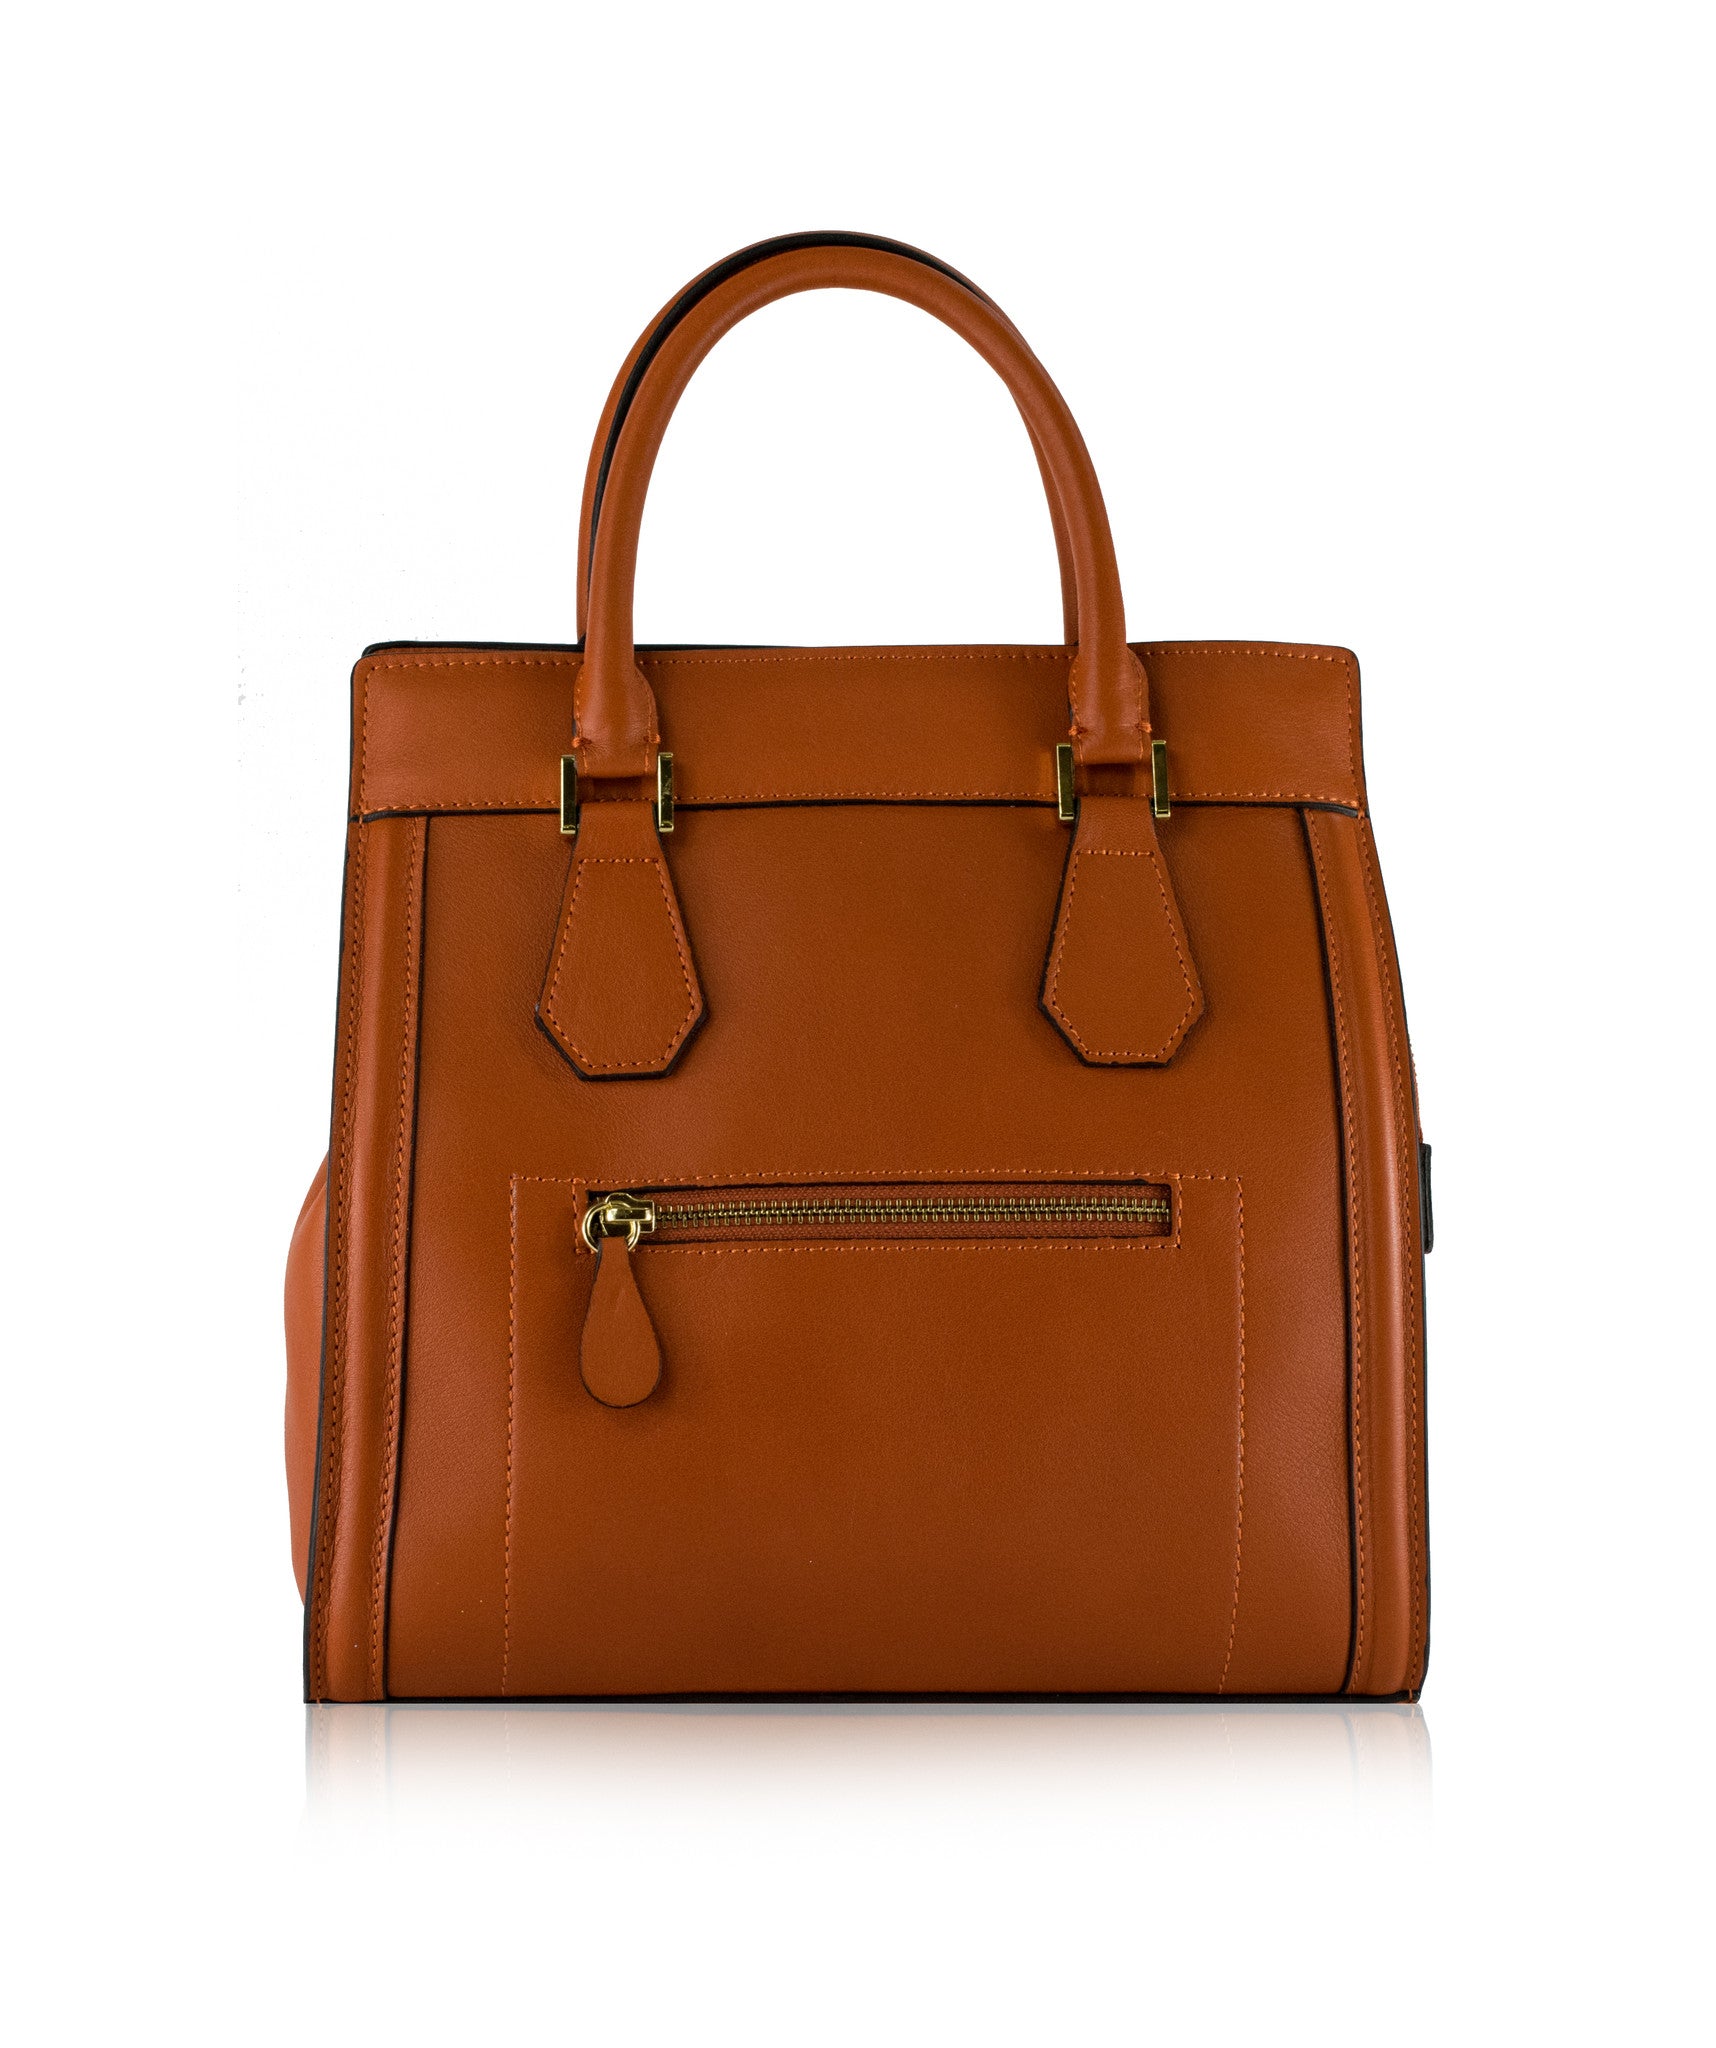 Italian Leather Handbags - View All Collections Page 2| Florence ...